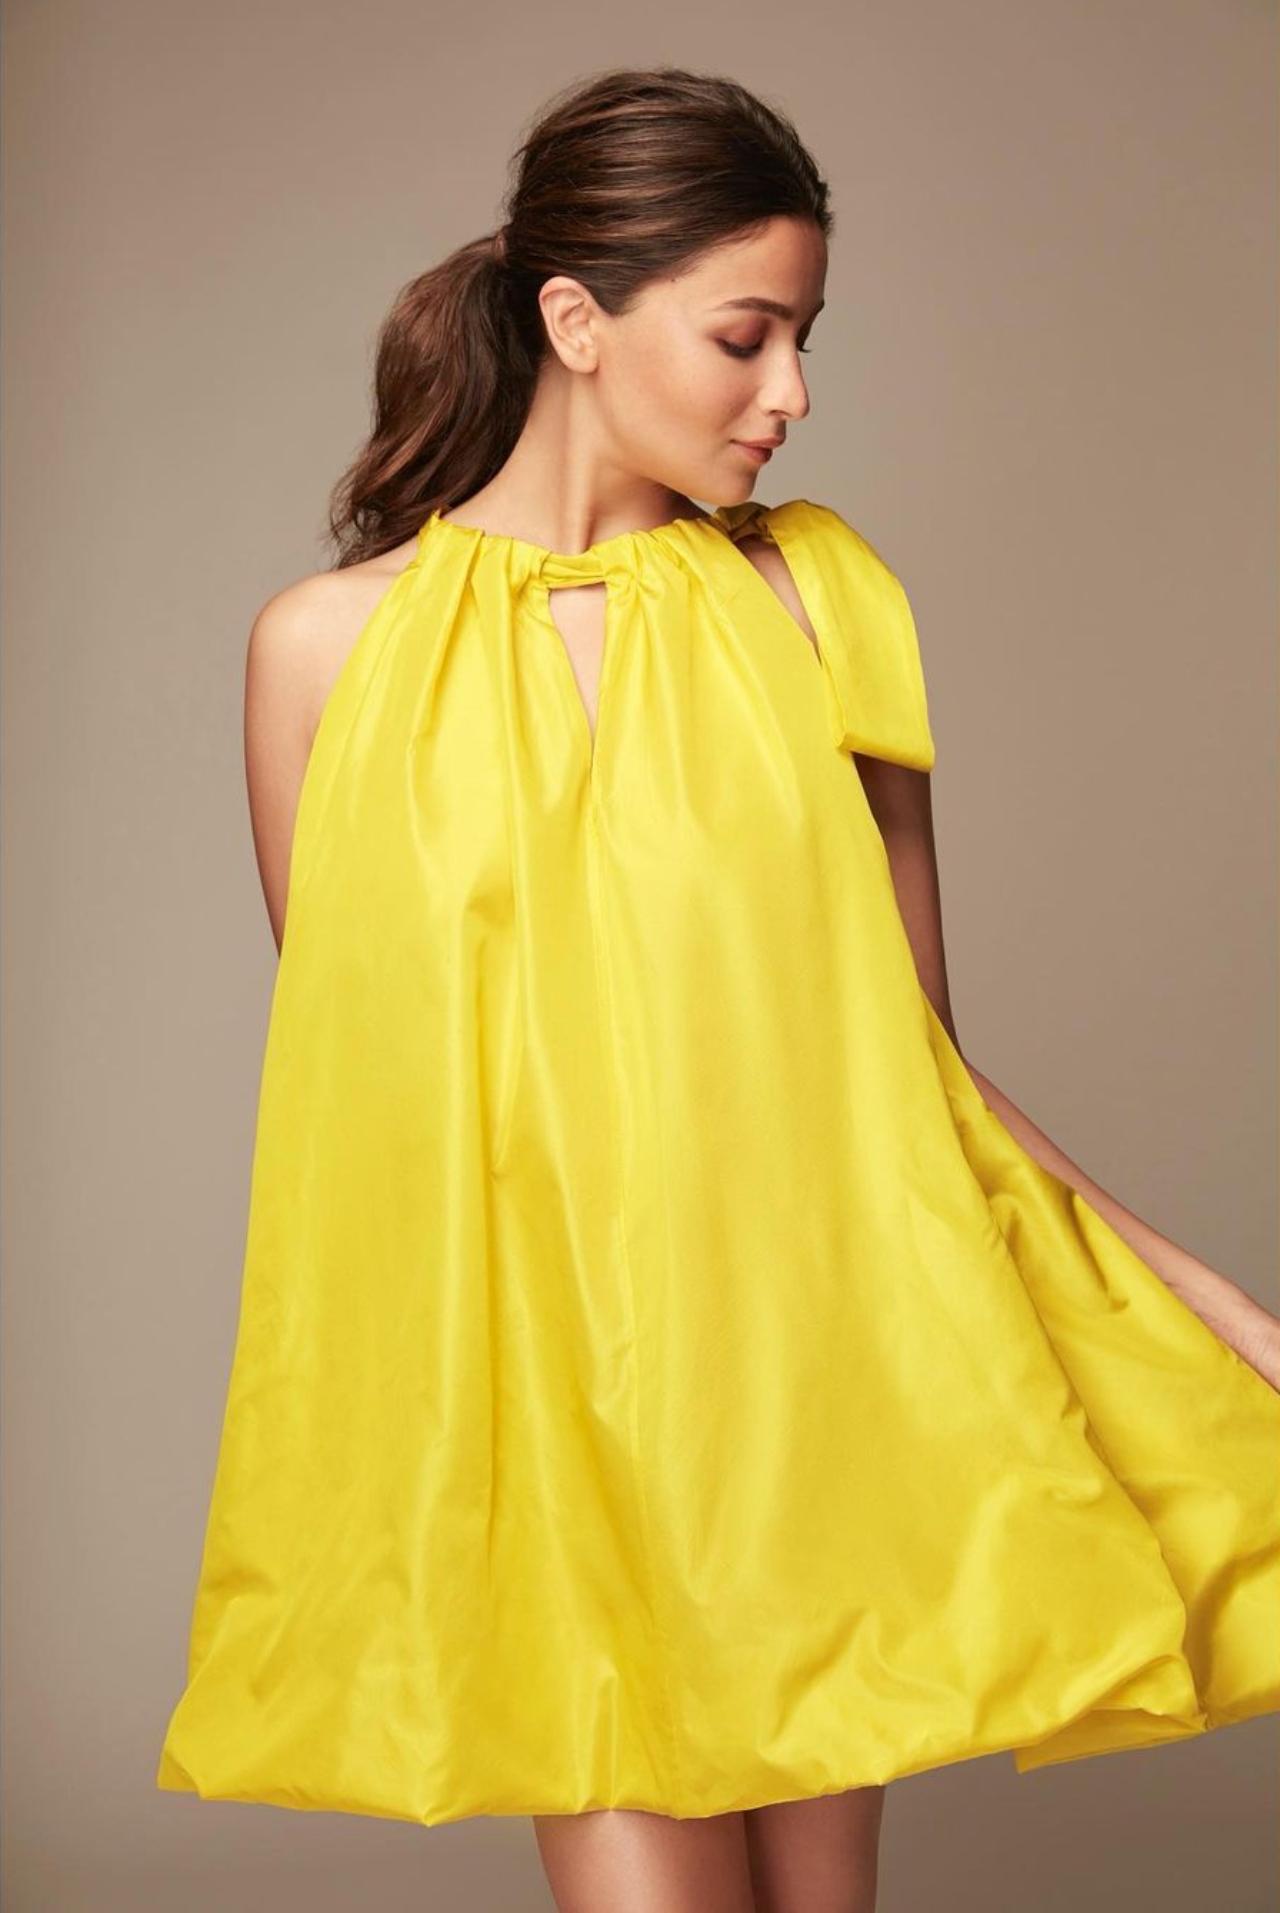 Alia Bhatt is Little Miss Sunshine Goes Bold in Yellow Balloon Dress, Hides  Baby Bump in Style - See Pics From Darlings Trailer Launch